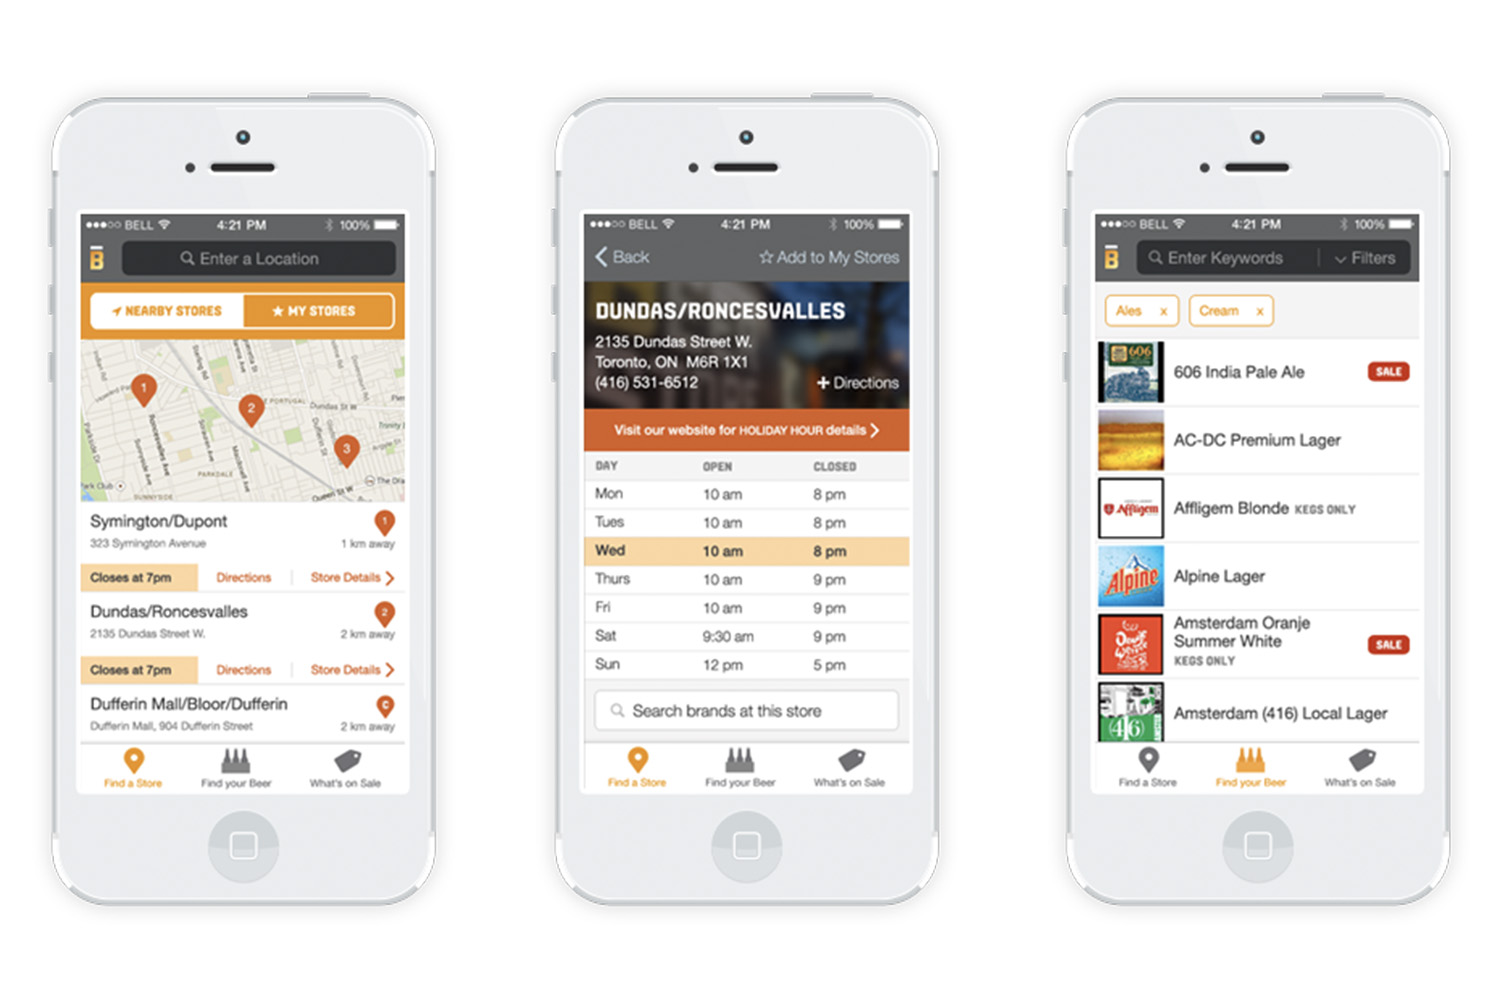 The Beer Store Mobile App